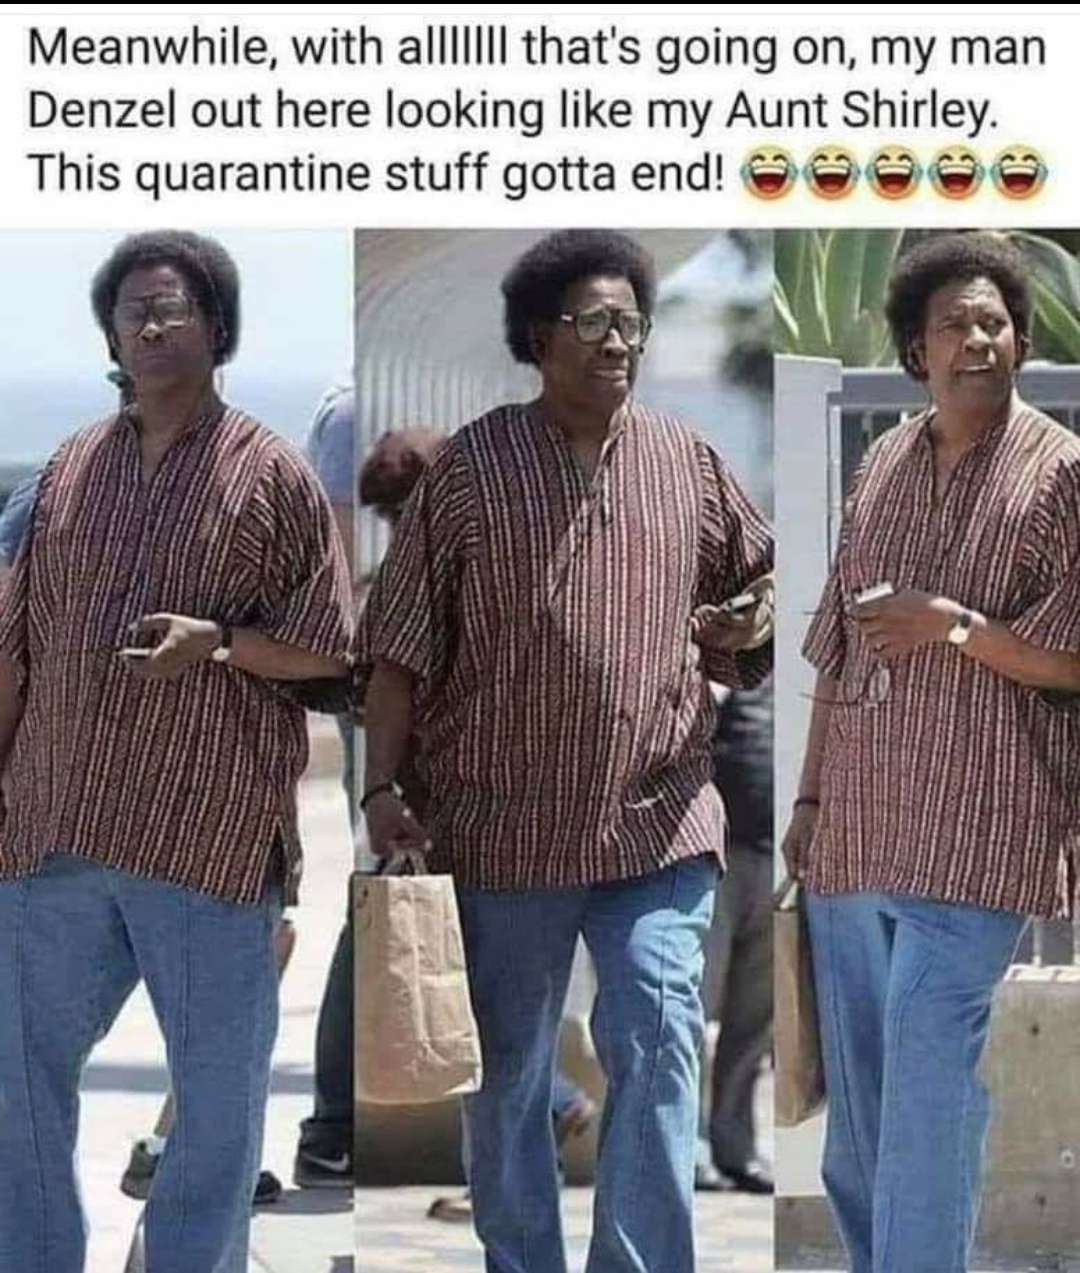 Meanwhile, with allillll that's going on, my man Denzel out here looking my Aunt Shirley. This quarantine stuff gotta end! e